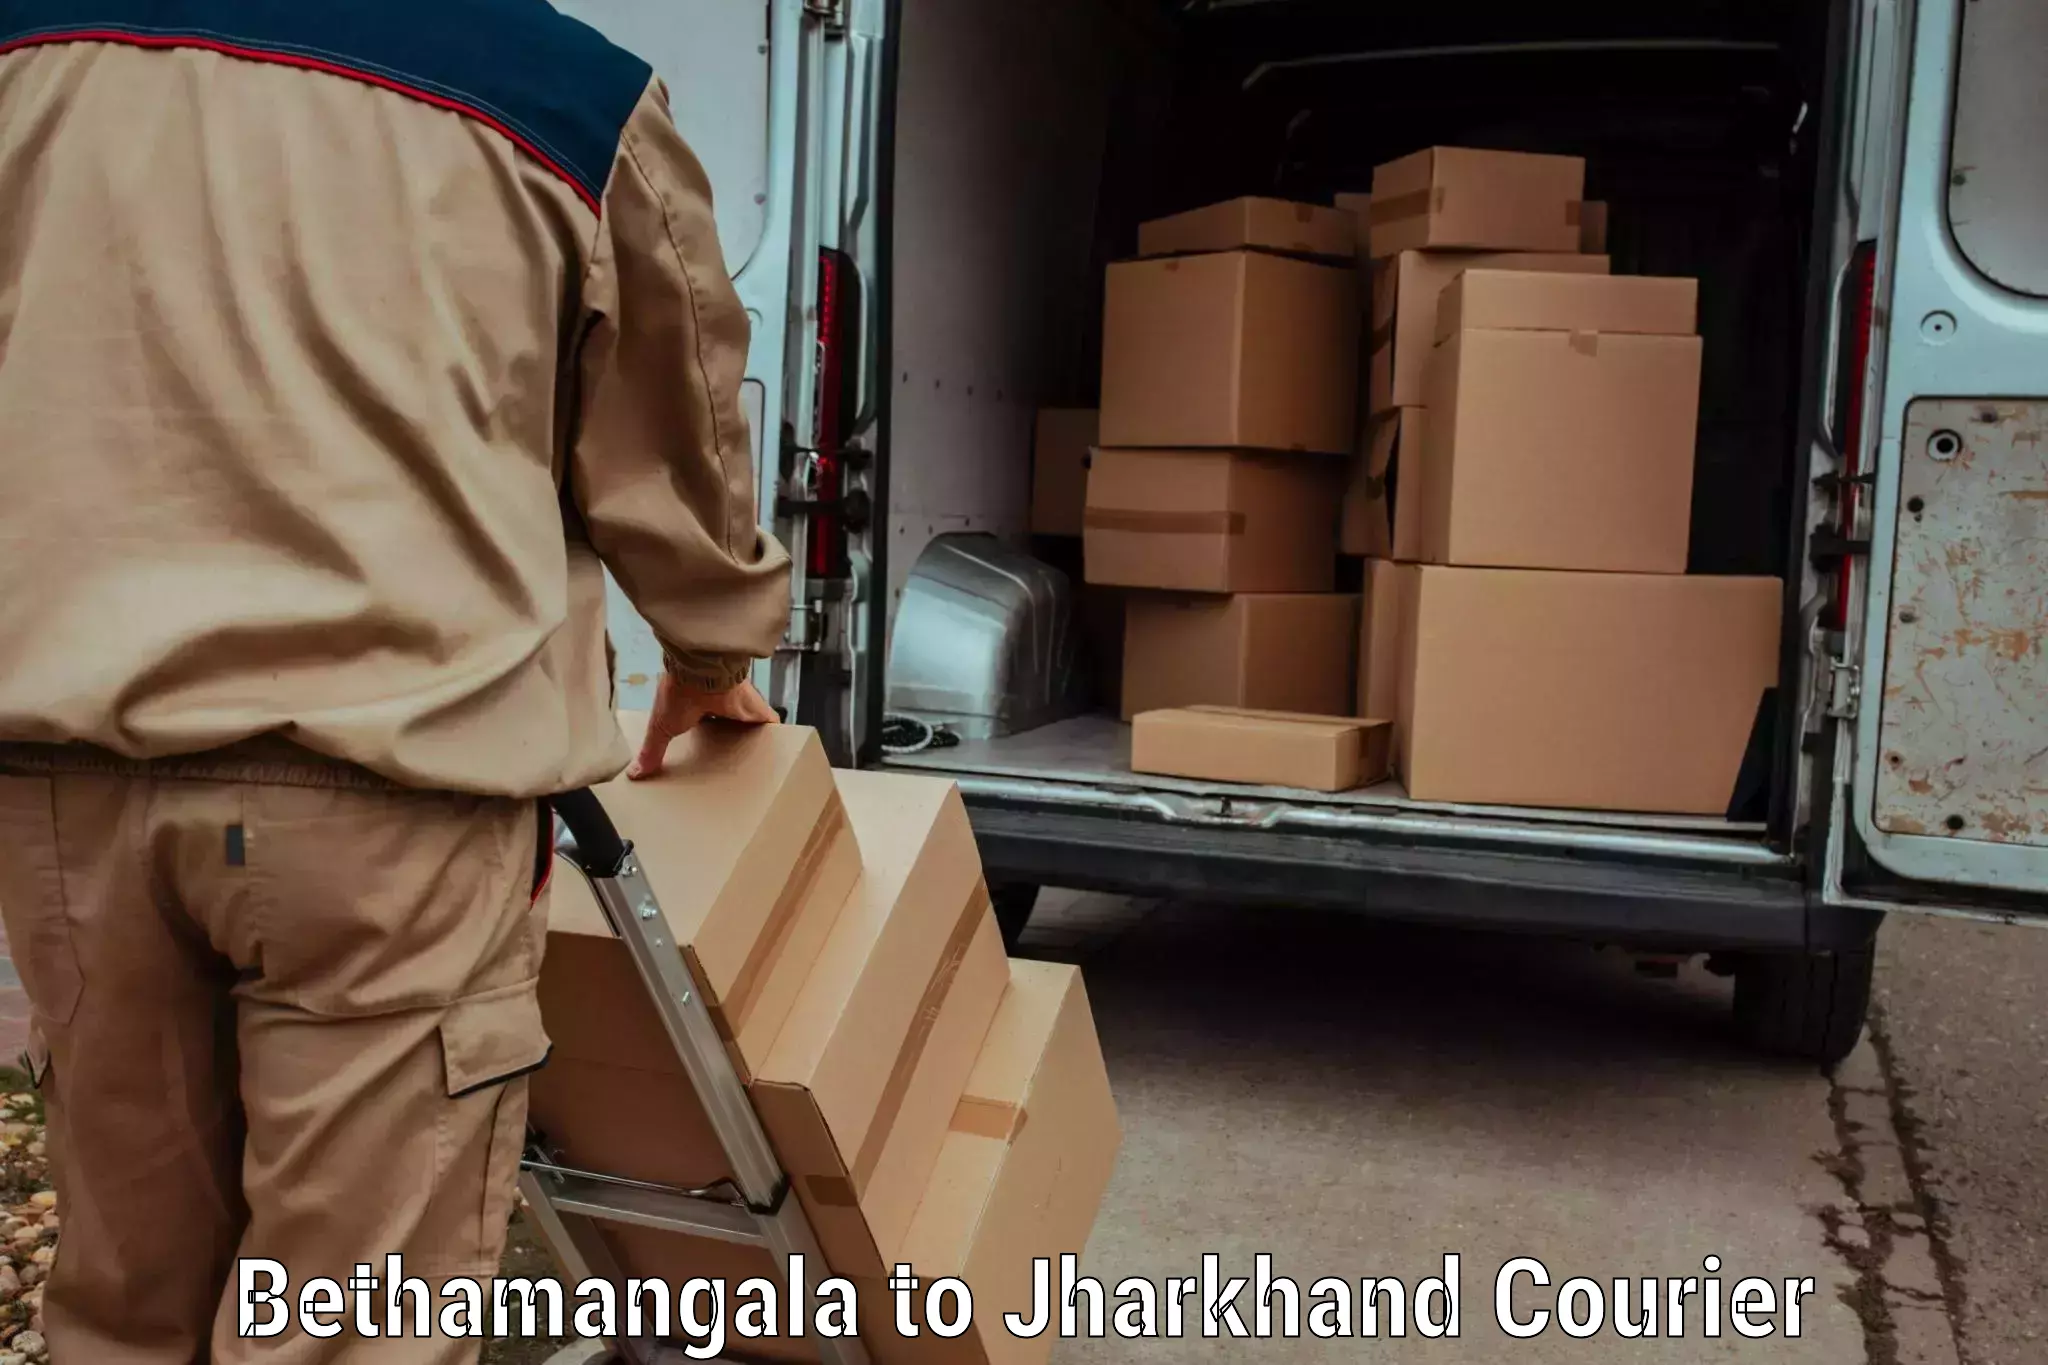 Next-day delivery options Bethamangala to Chandwa